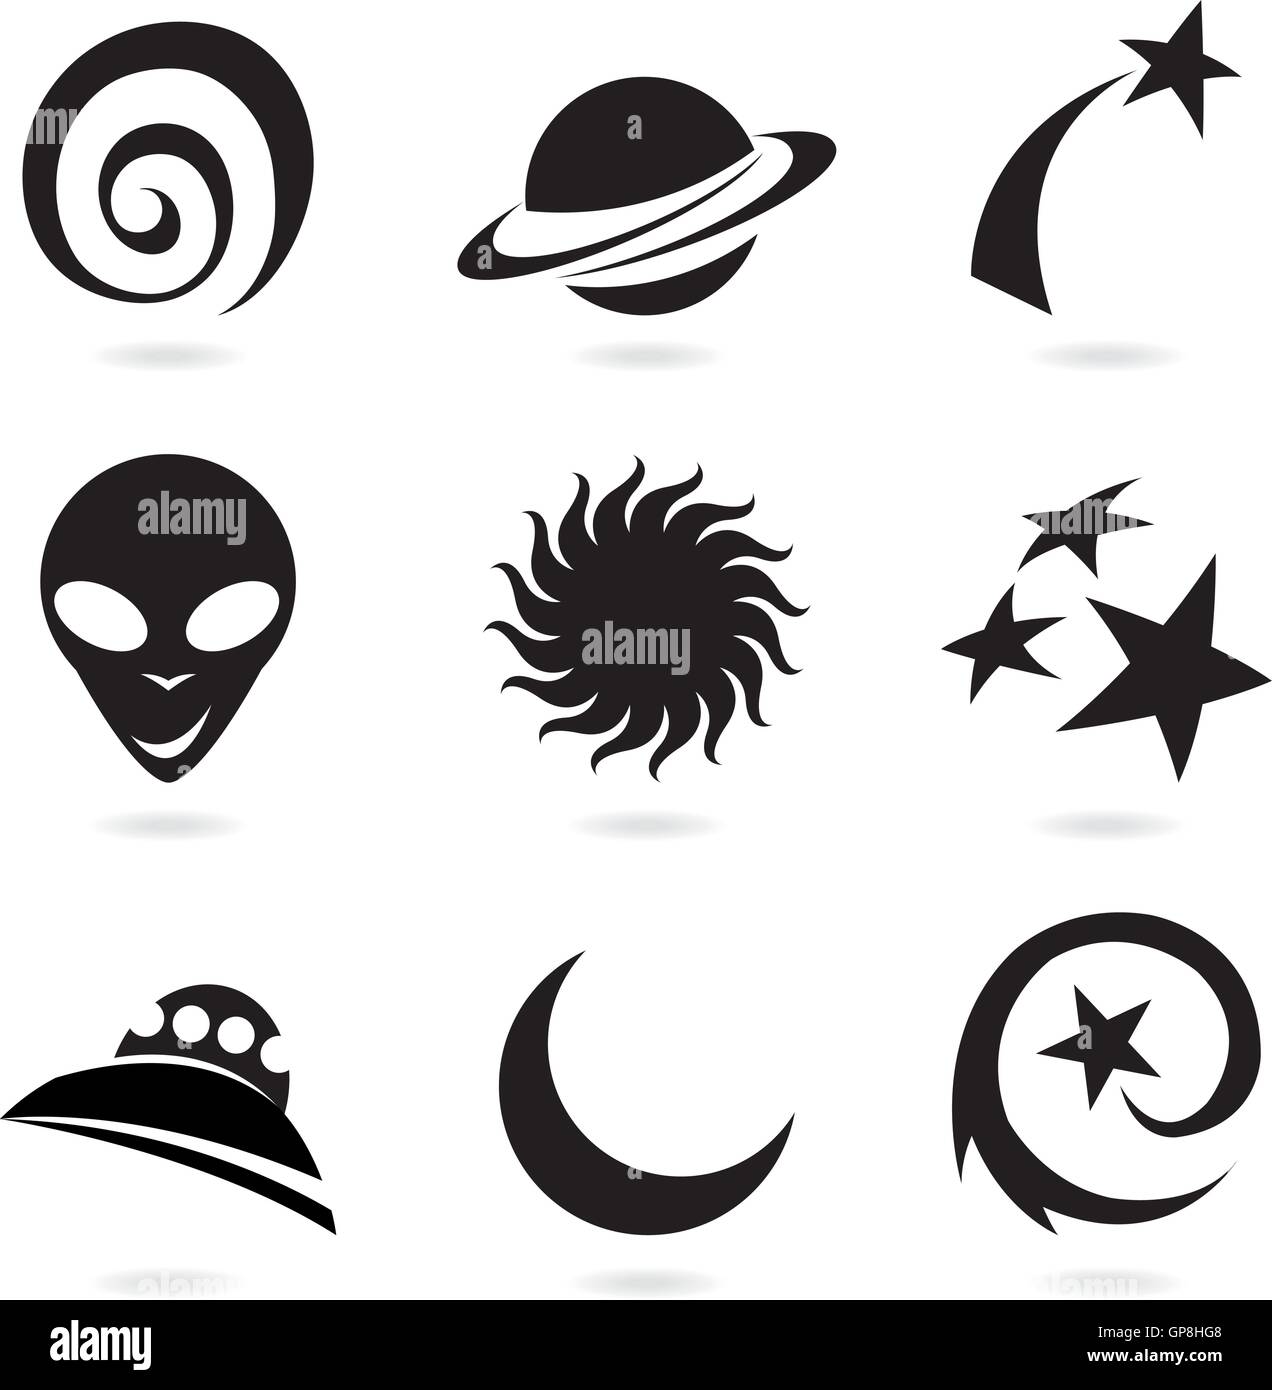 colourful fun space icons silhouettes Stock Vector